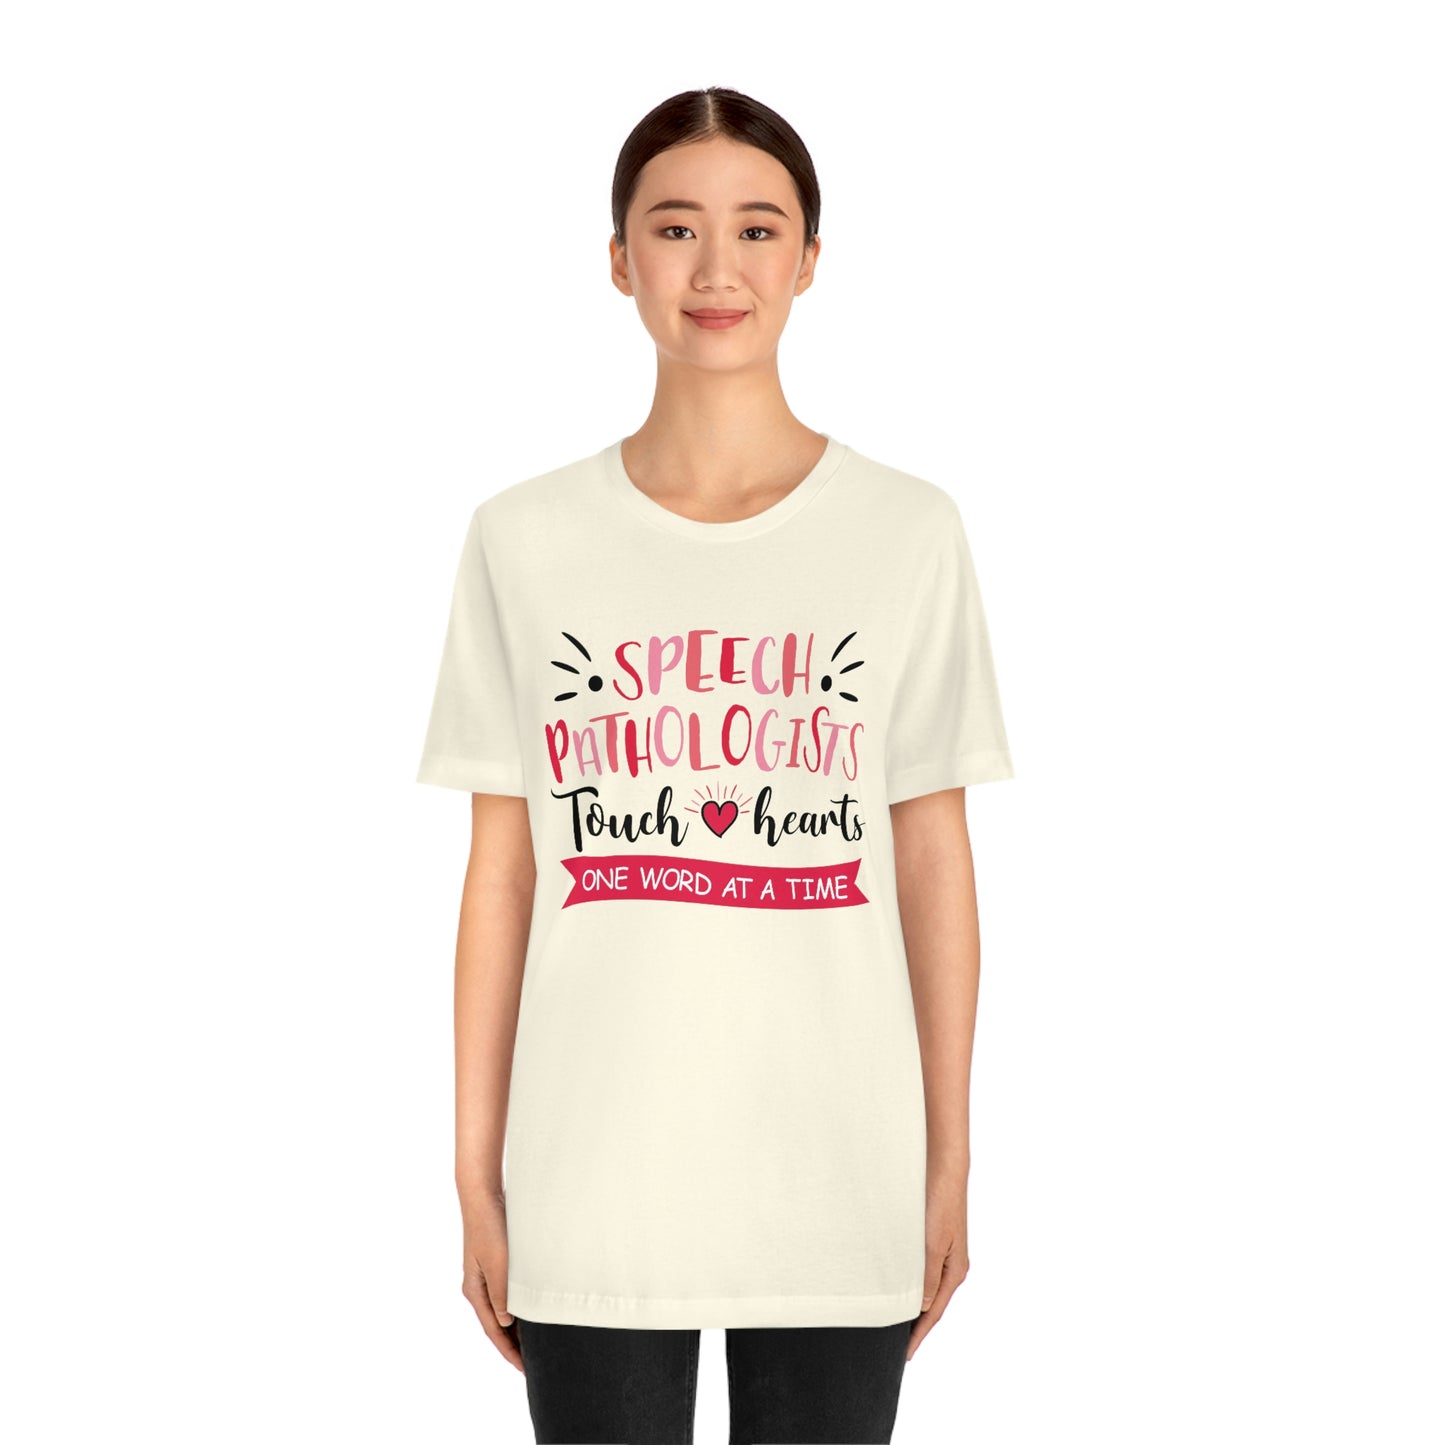 SLP Valentine's Day Shirt Speech Patholigists Touch Hearts One Word At A Time